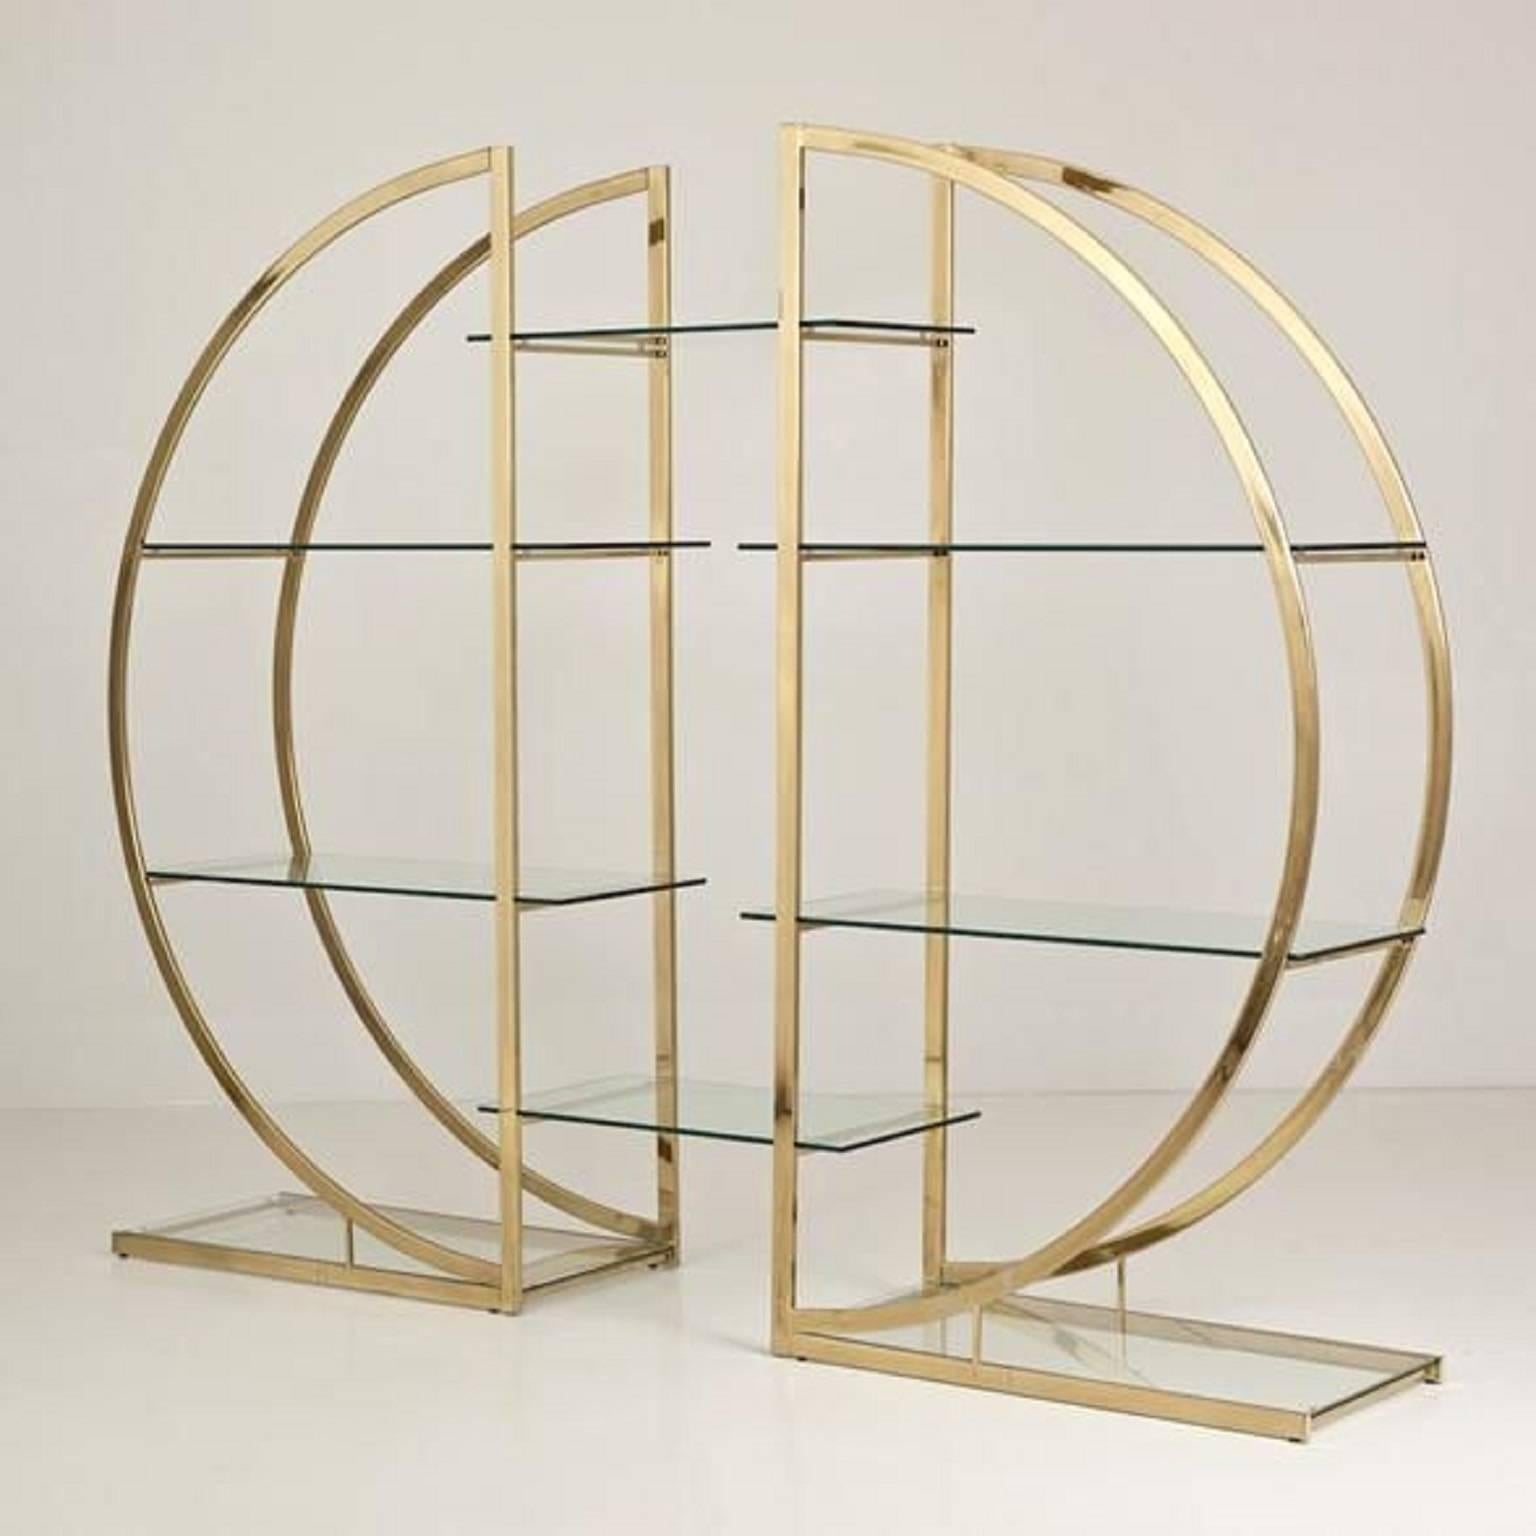 Amazing Milo Baughman brass pair of display shelves or étagères. This can be made into one étagère as pictured or the étagères can be separated into a pair. Great piece! Mid-Century Modern, Hollywood Regency style. Some scuffs, patina areas to